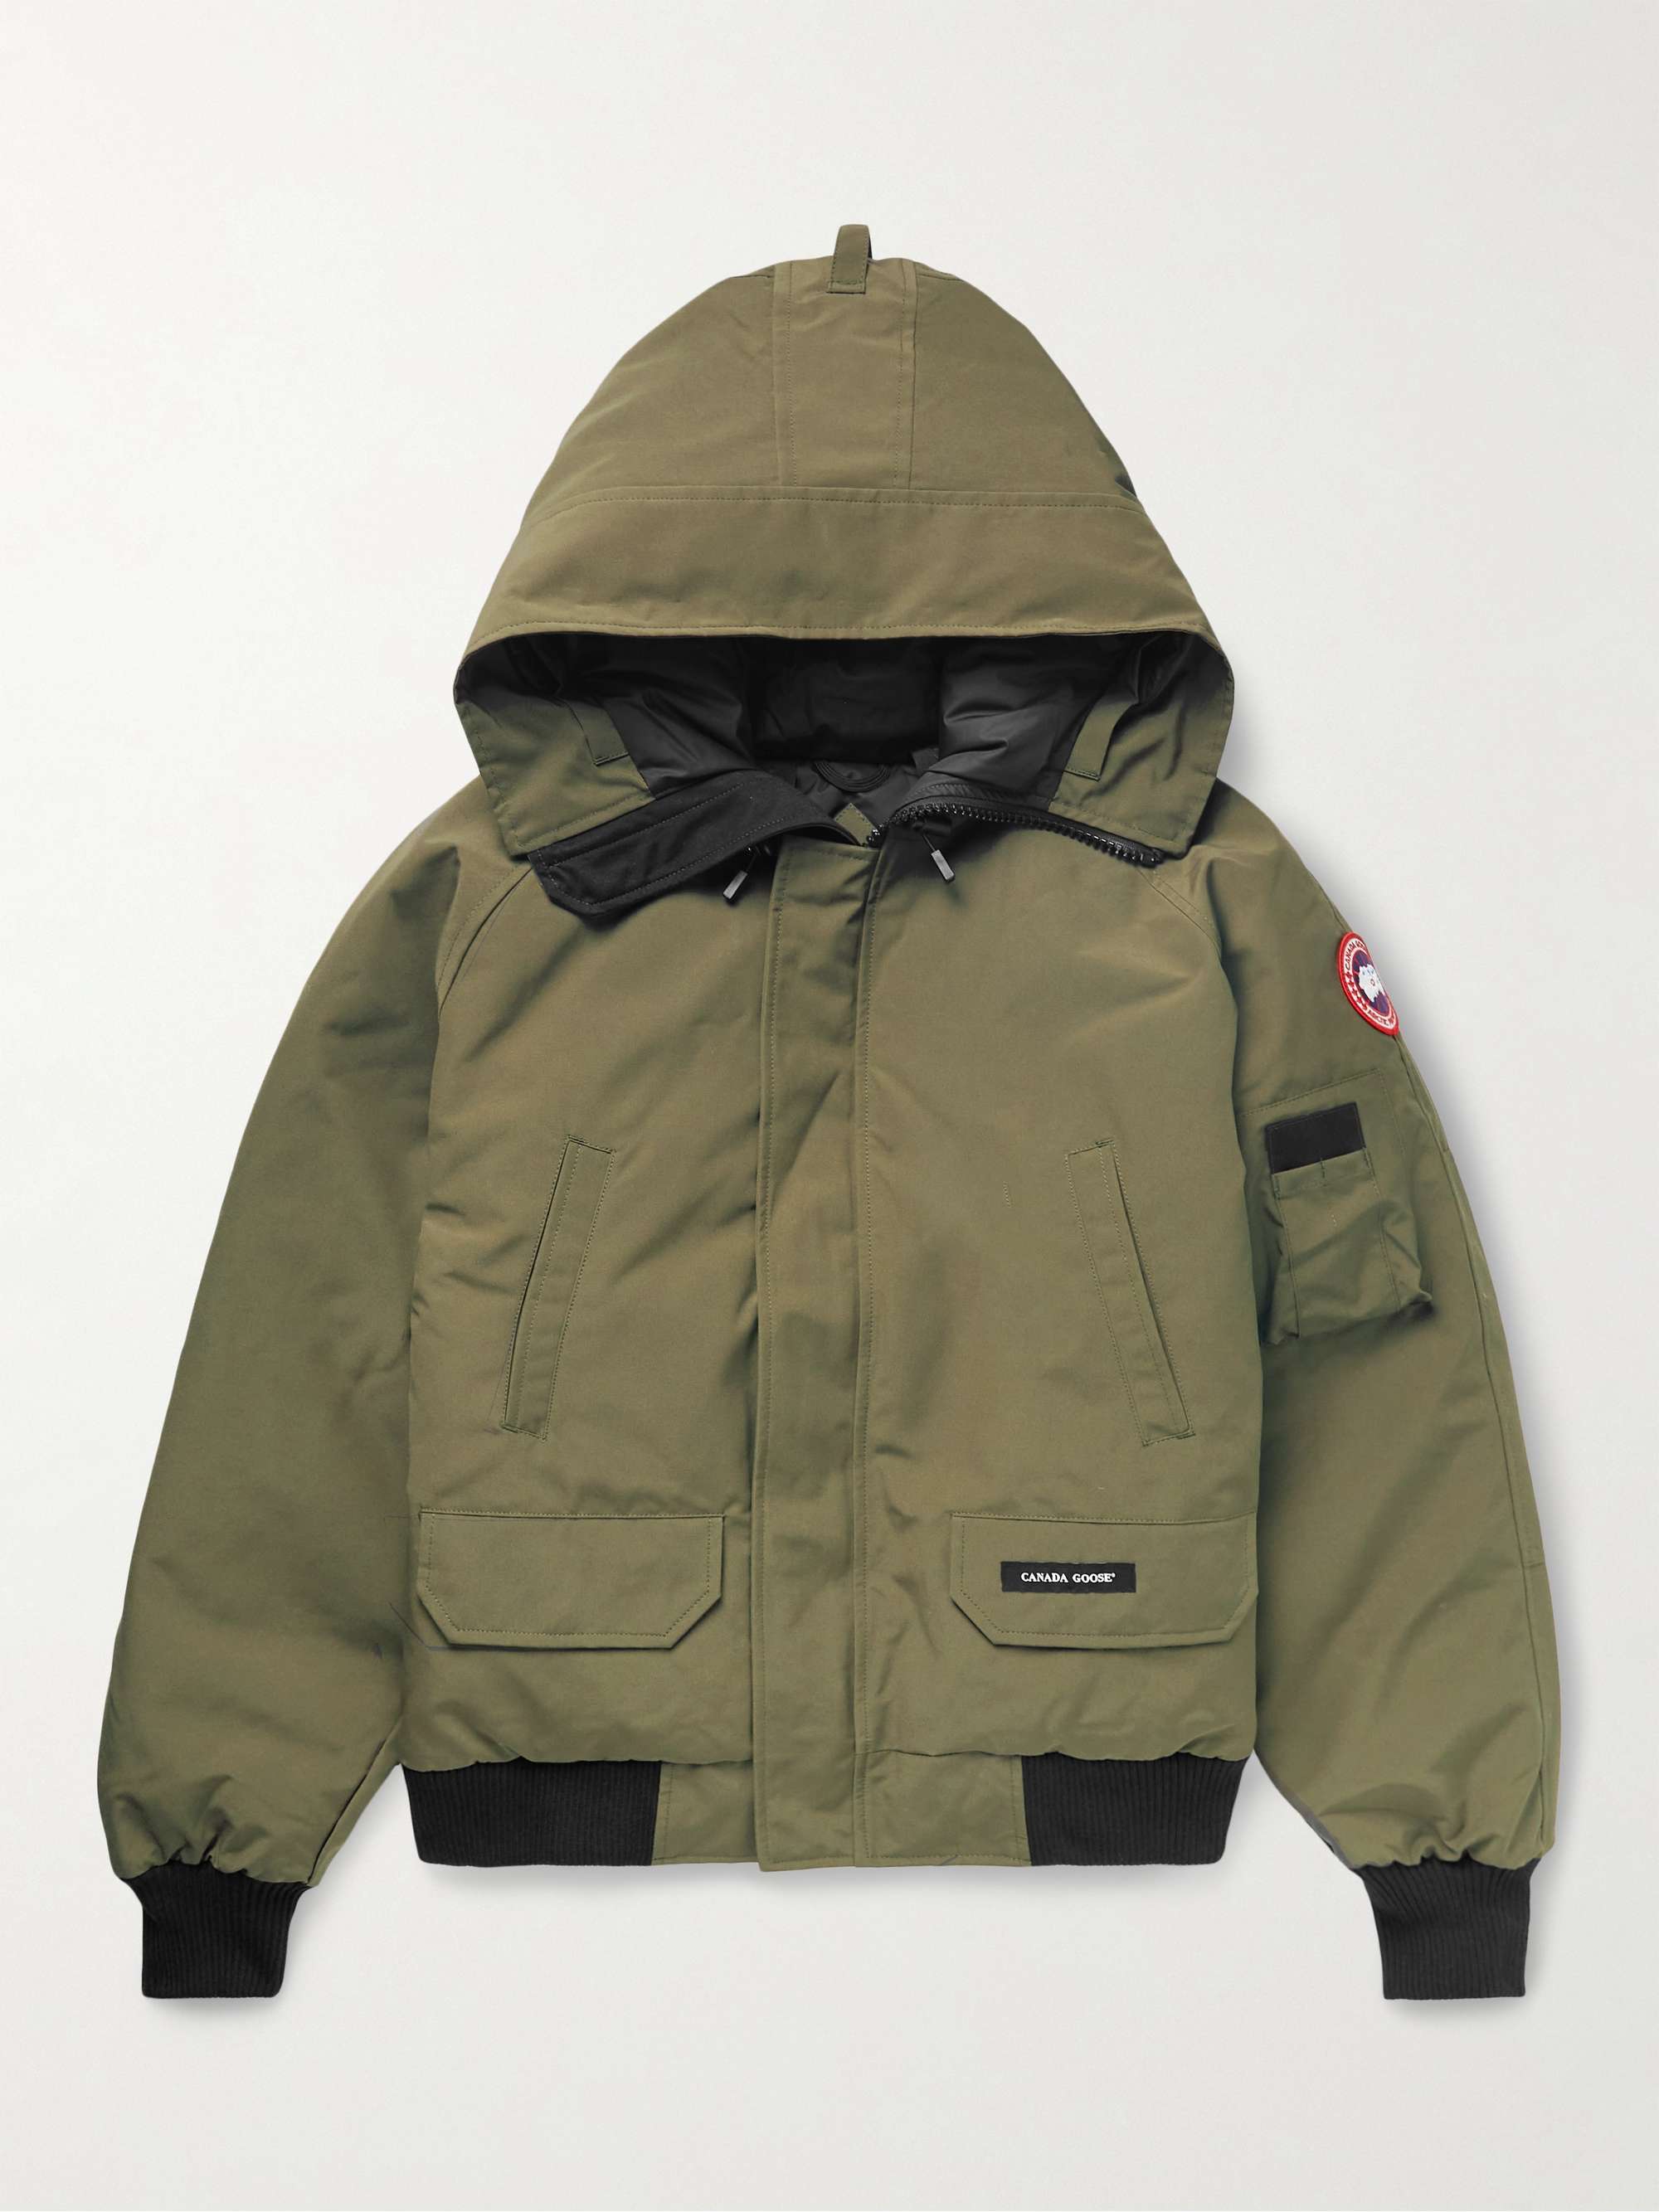 CANADA GOOSE Chilliwack Arctic Tech® Hooded Down Jacket | MR PORTER